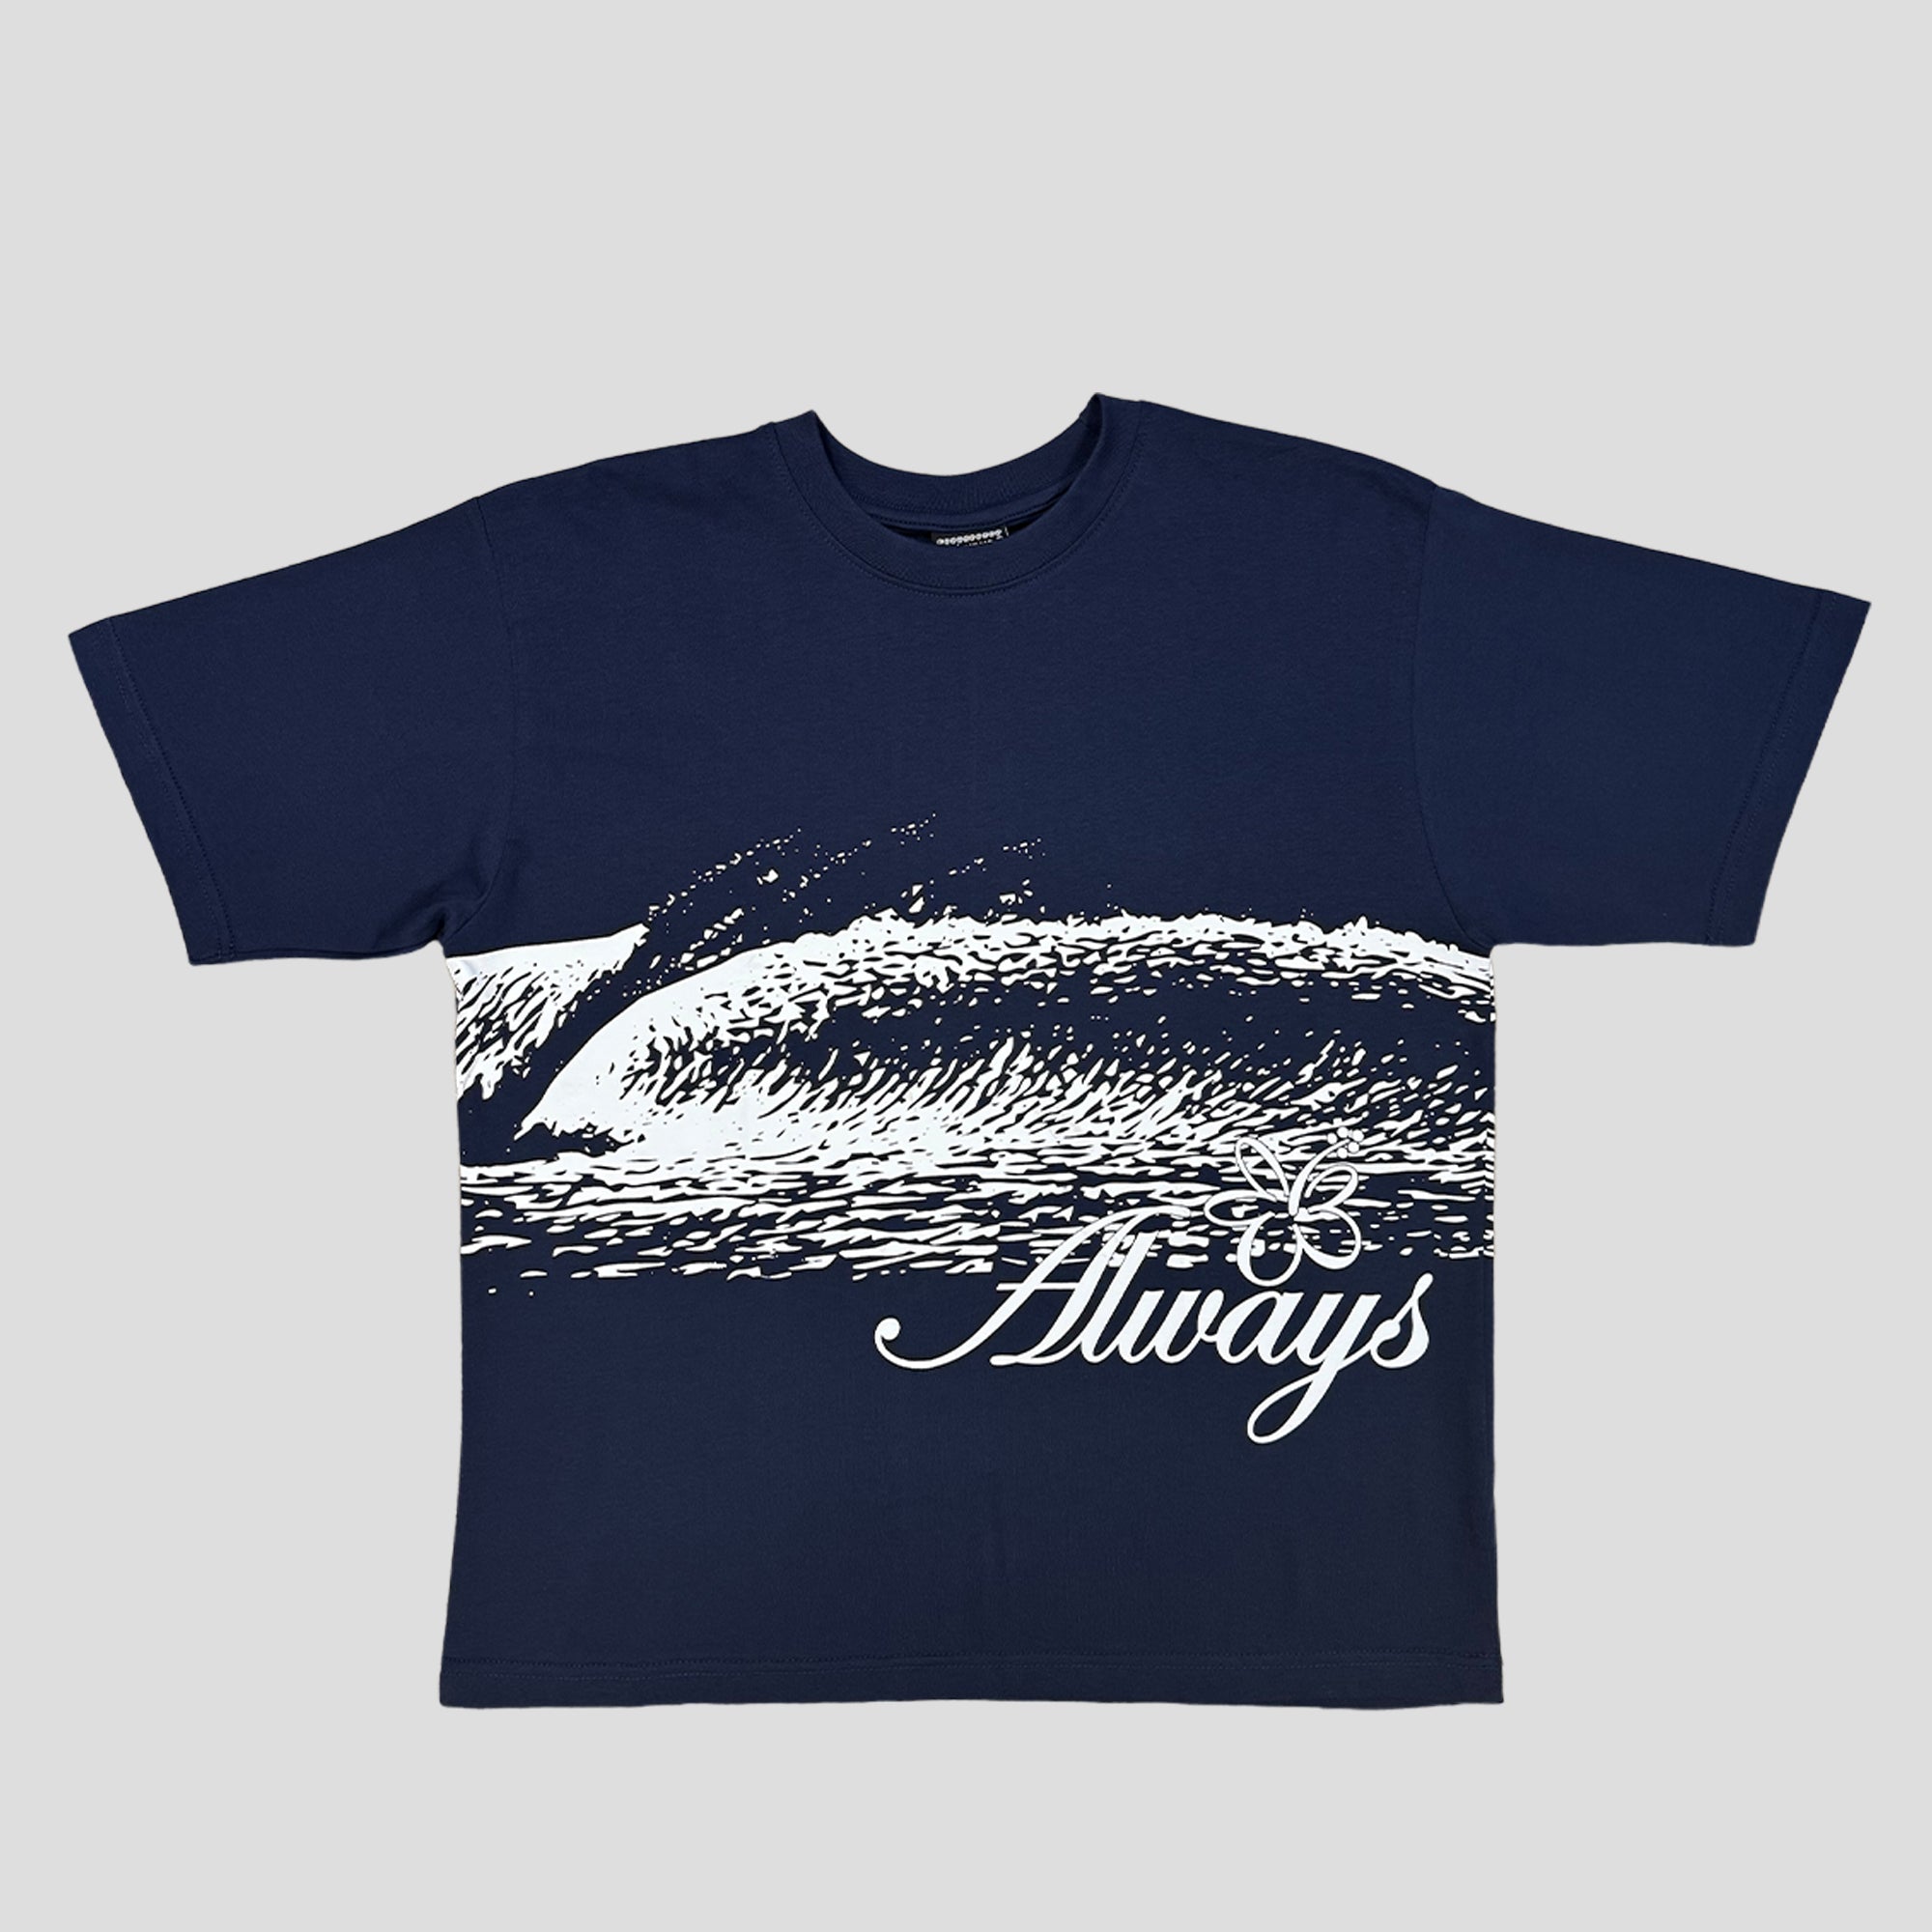 Always Do What You Should Do A-Frame T-Shirt - Navy